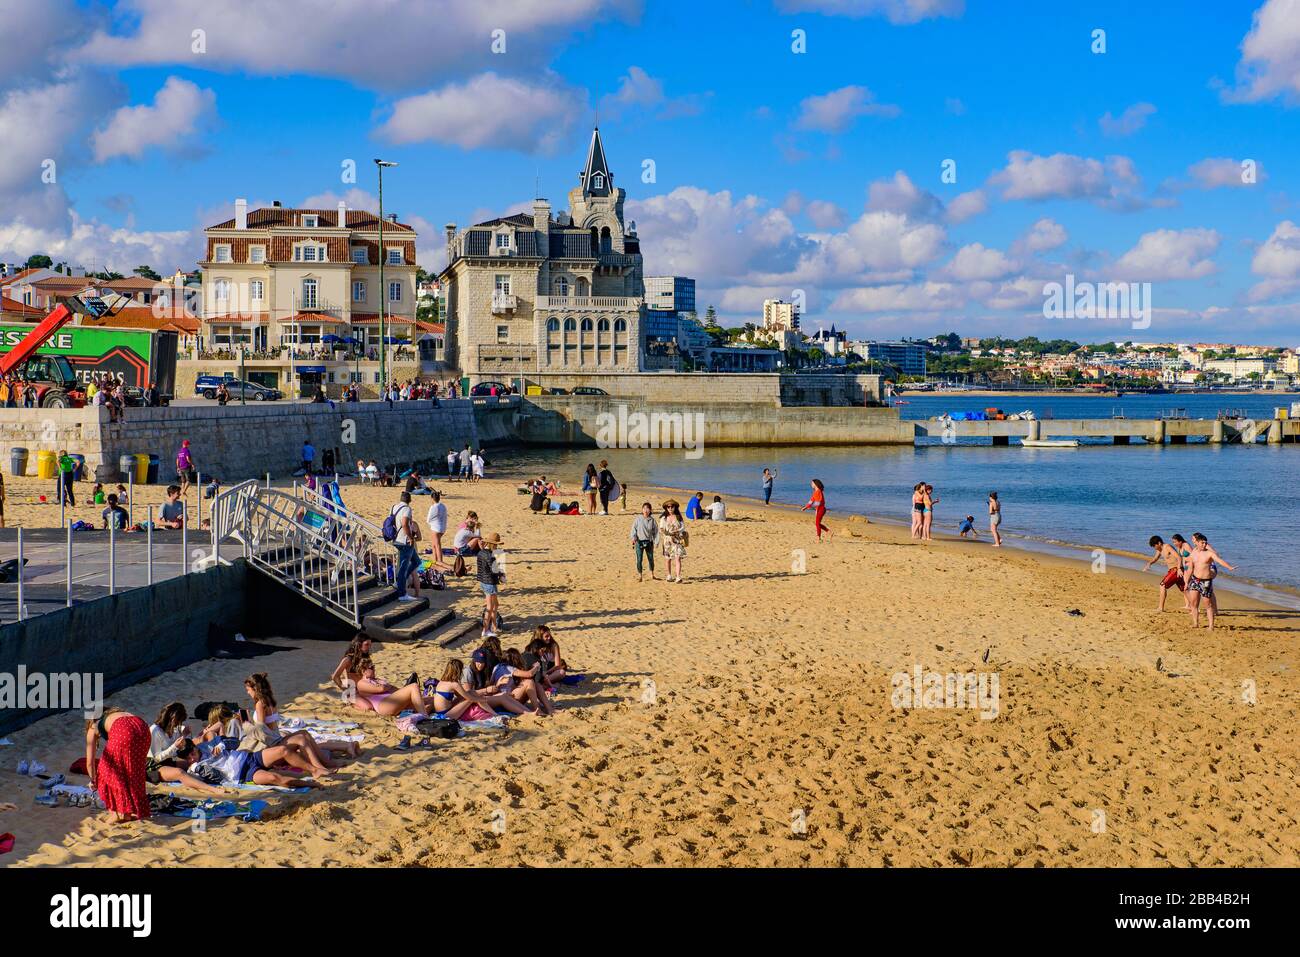 People playing at the beach in Cascais, Lisbon, Portugal Stock Photo